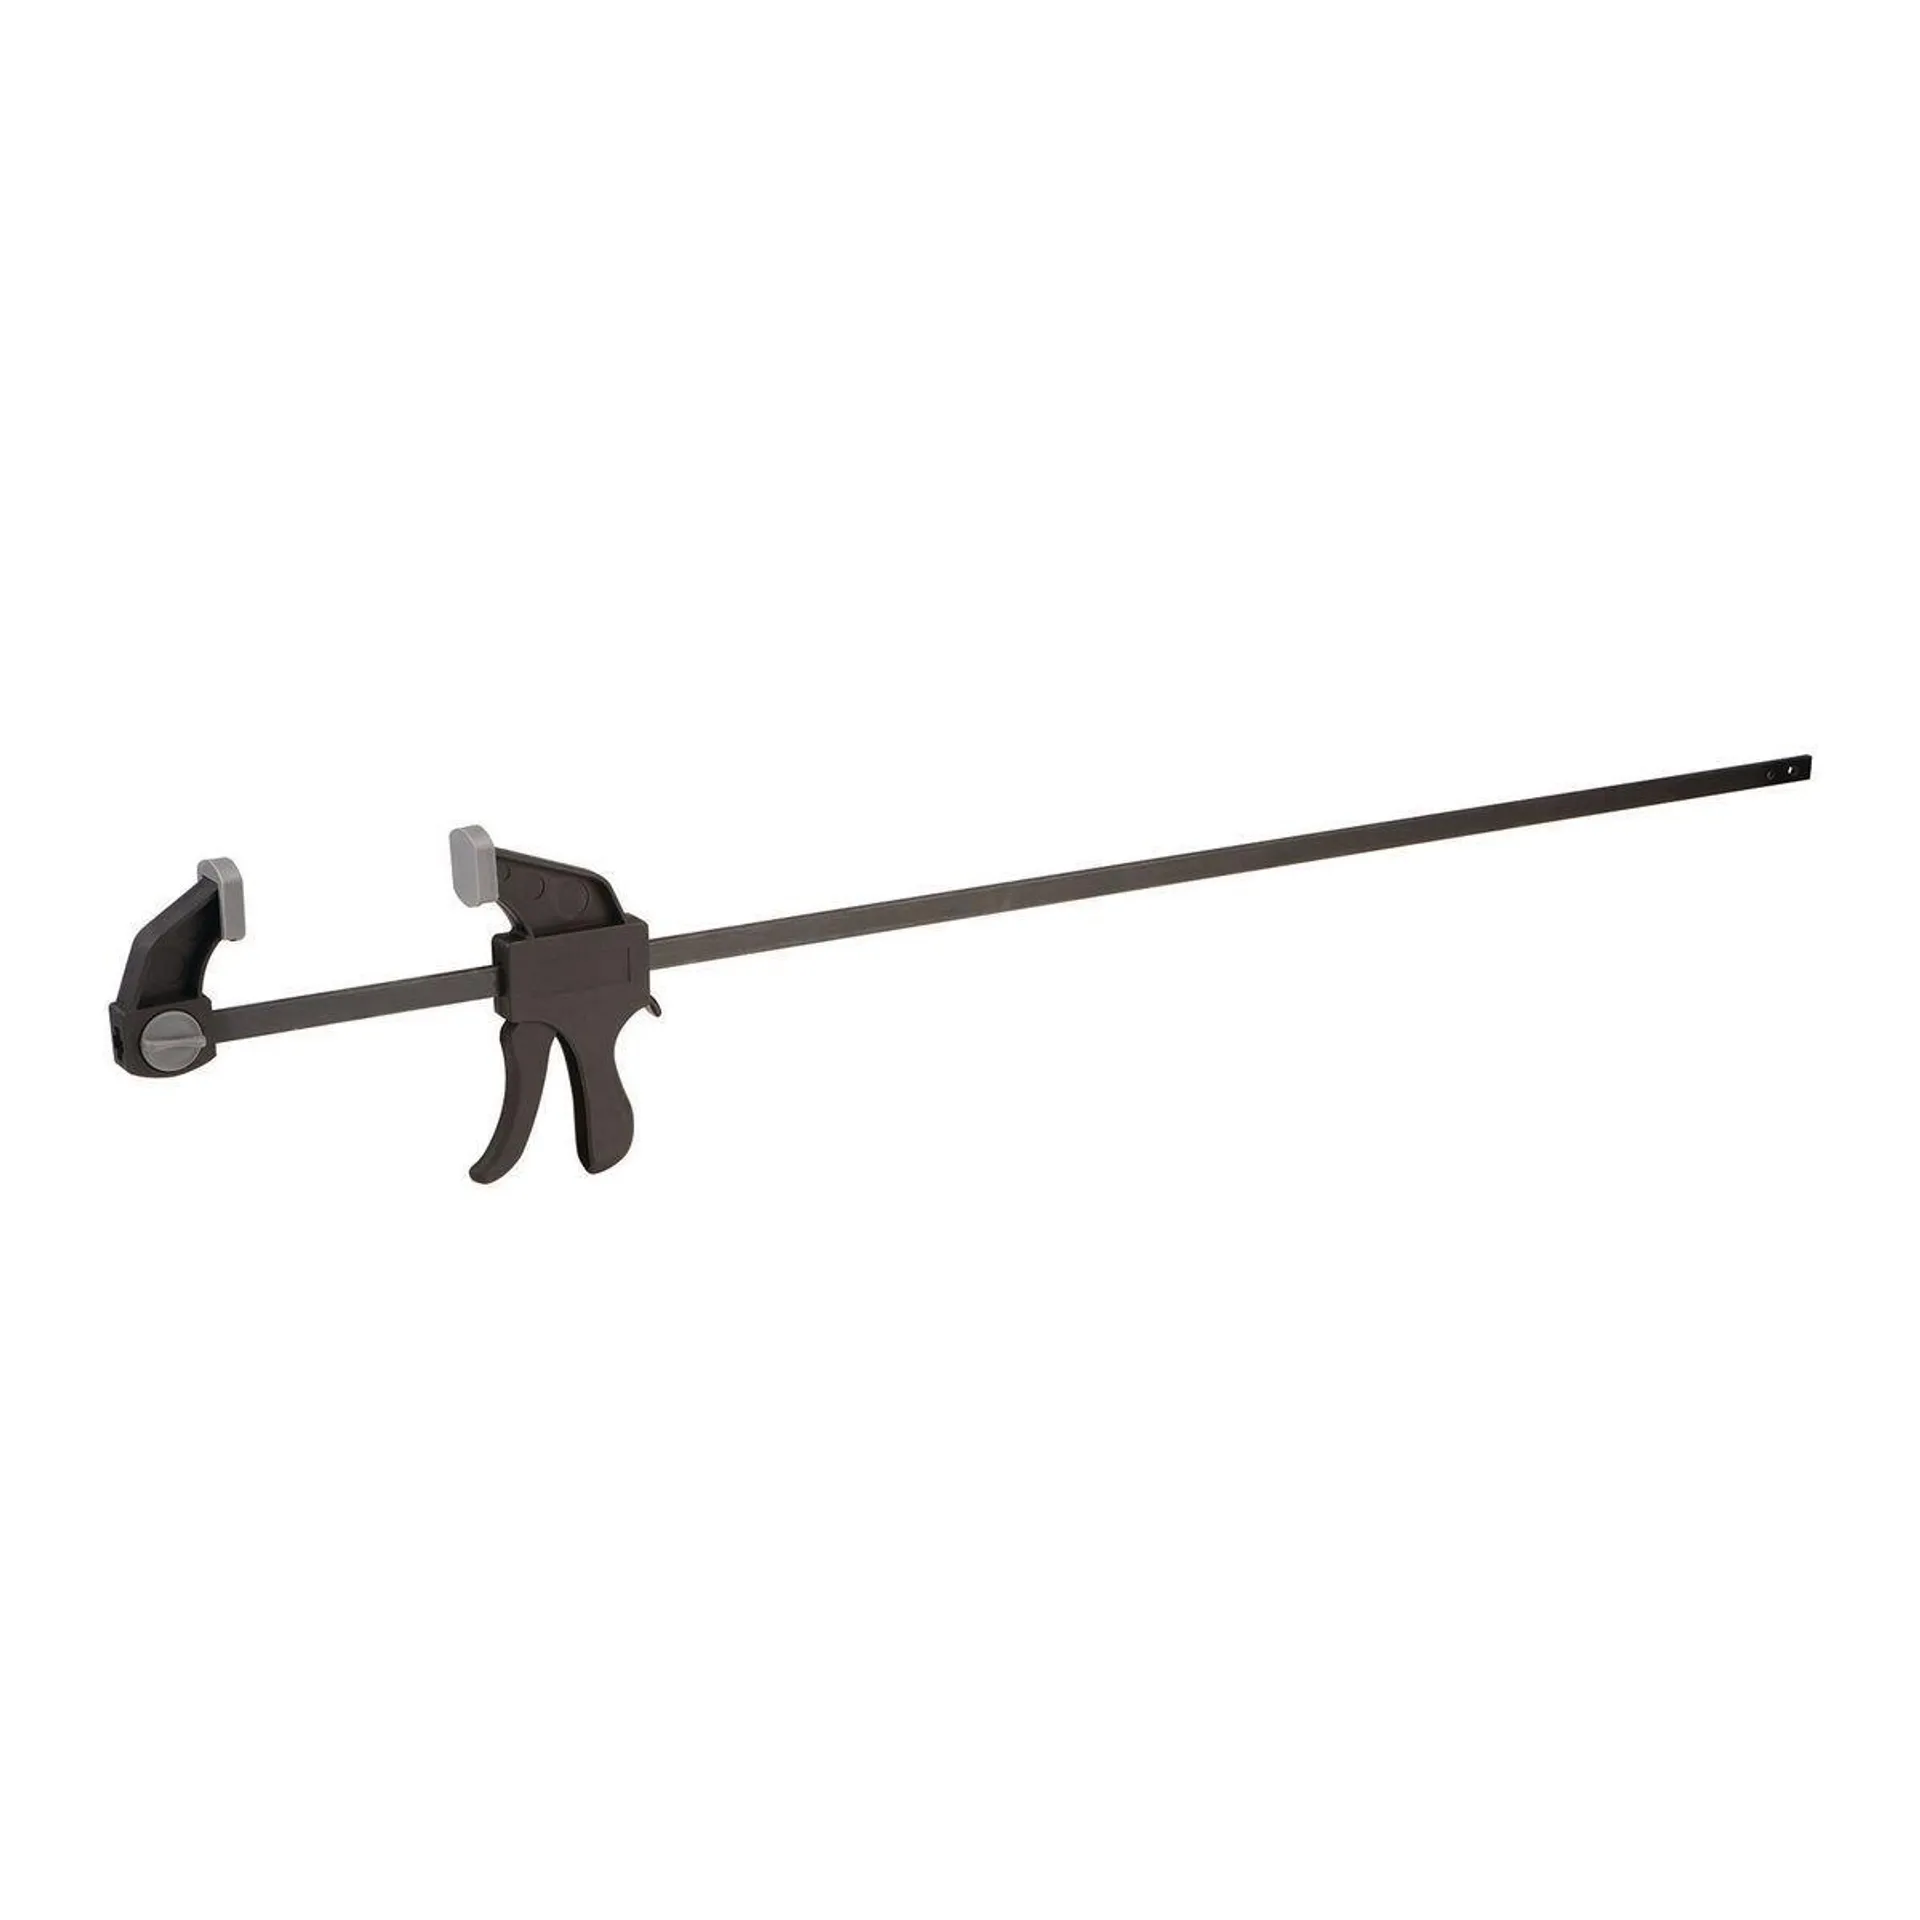 PITTSBURGH 36 in. Ratcheting Bar Clamp/Spreader